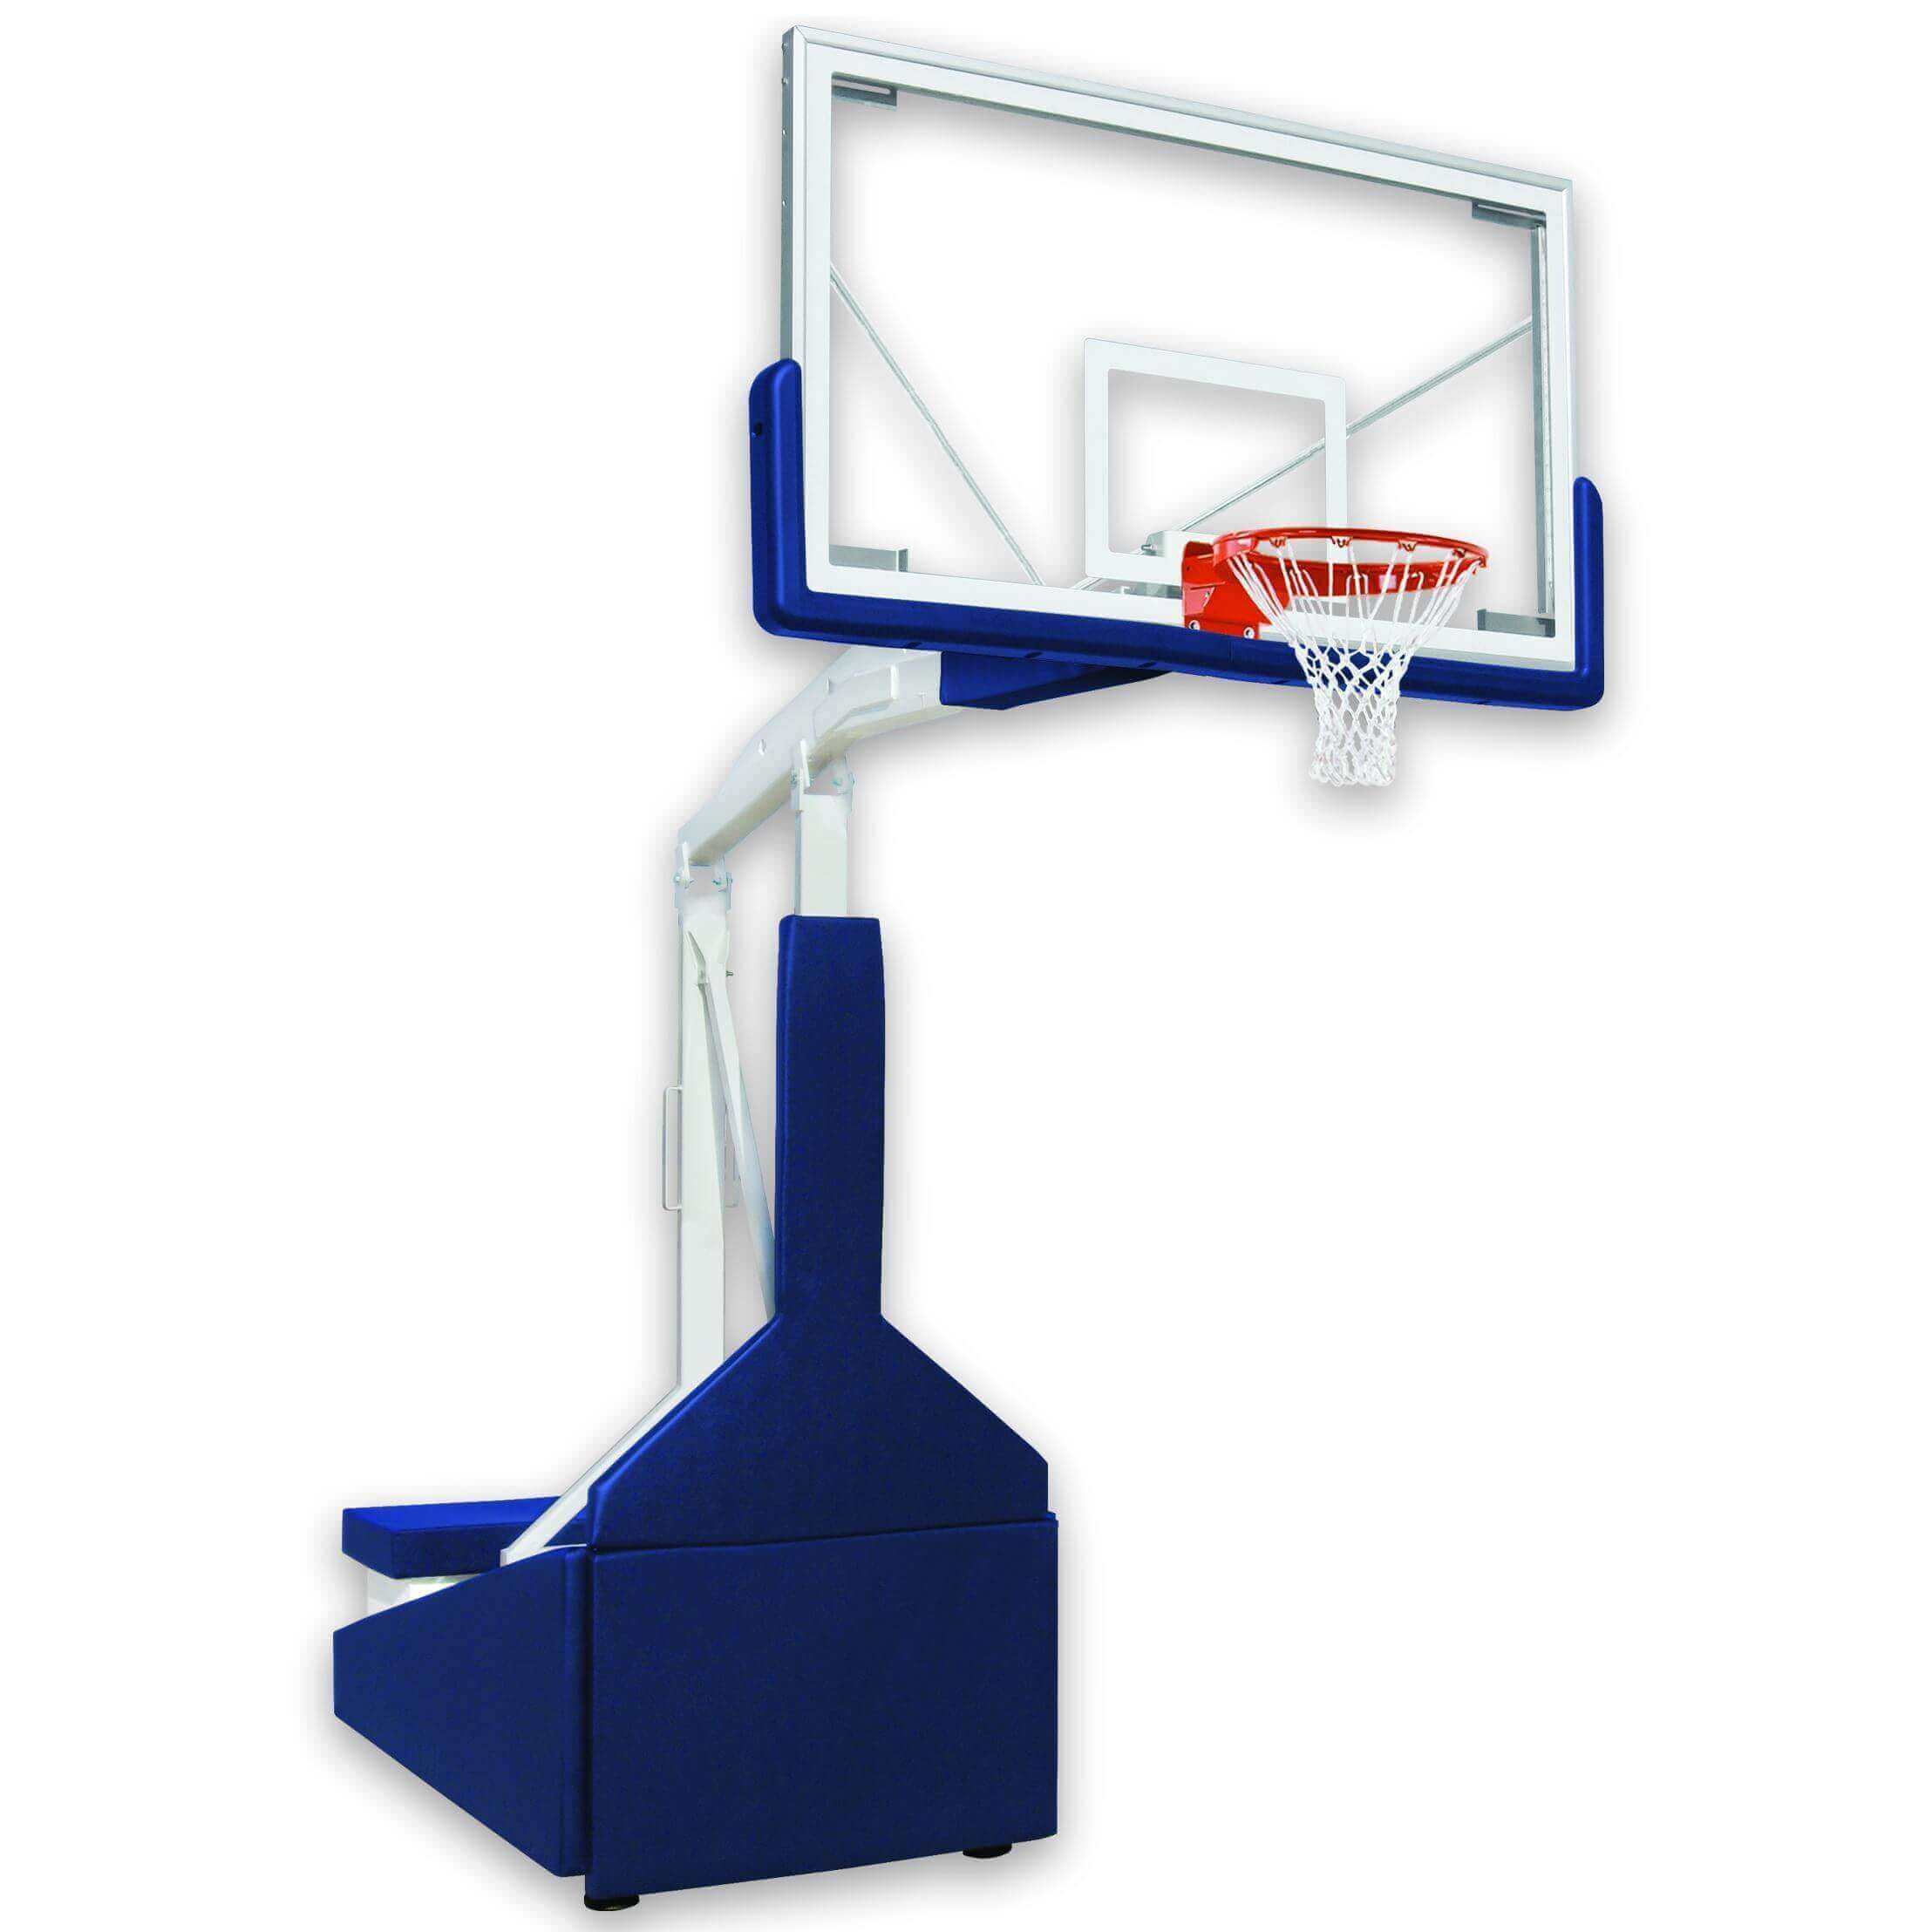 First Team Tempest Triumph Series Of Portable Basketball Hoops